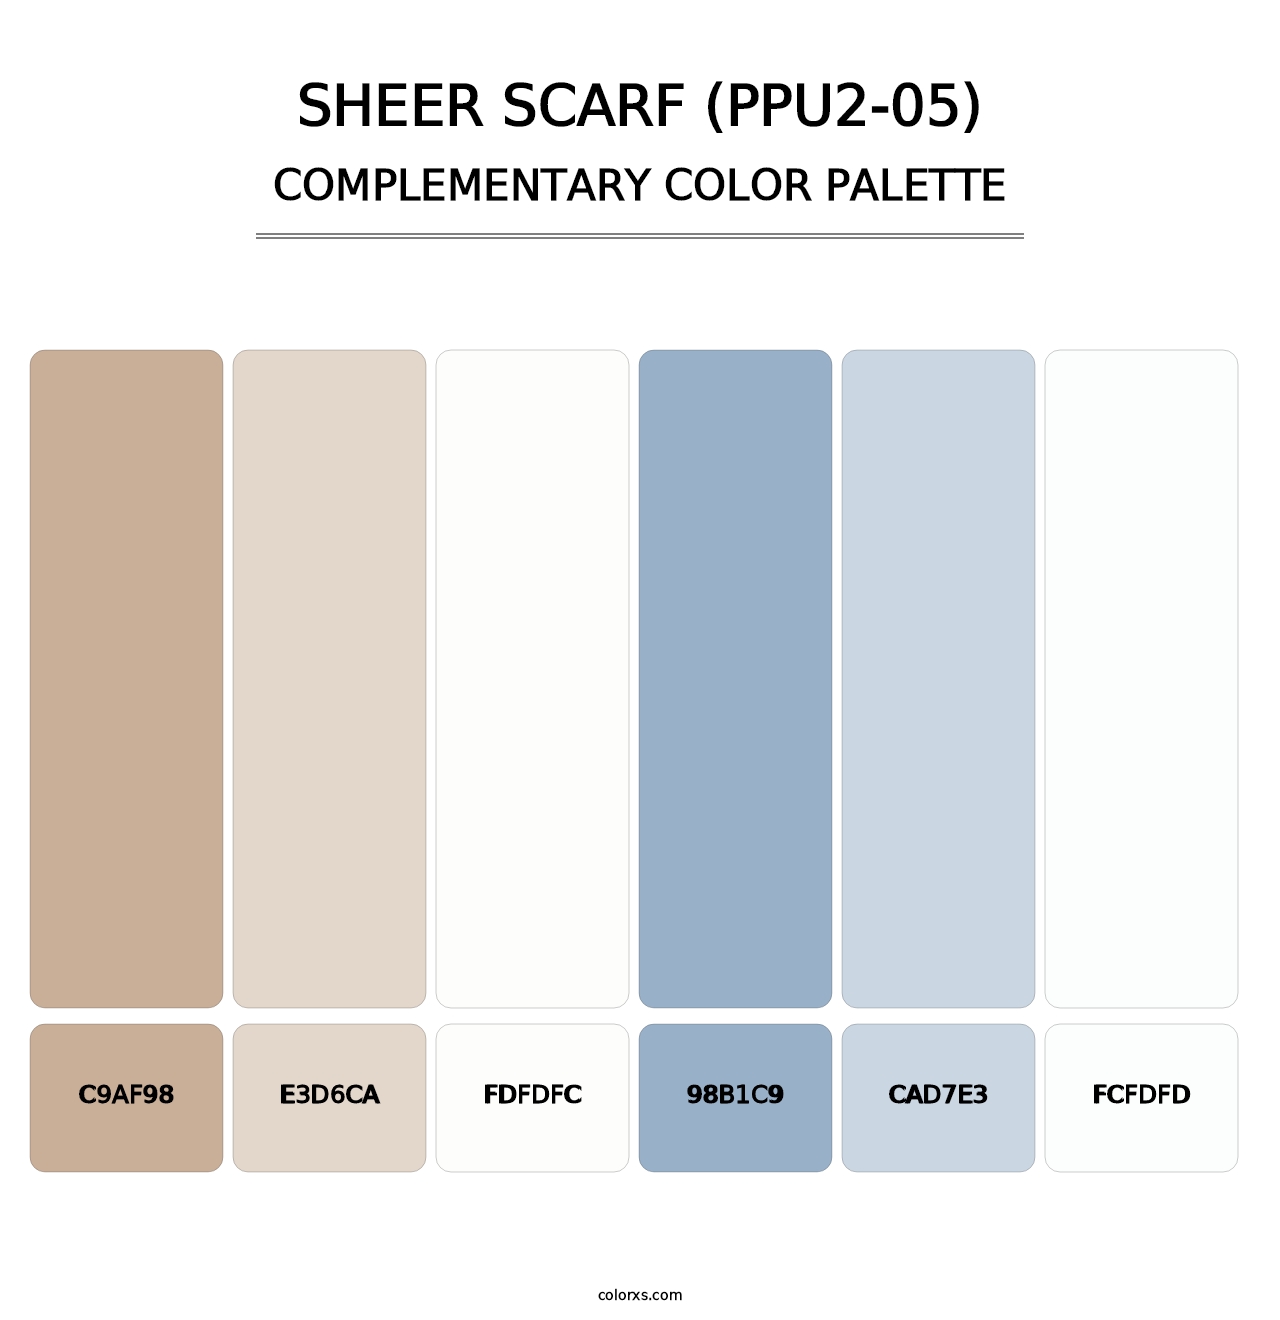 Sheer Scarf (PPU2-05) - Complementary Color Palette